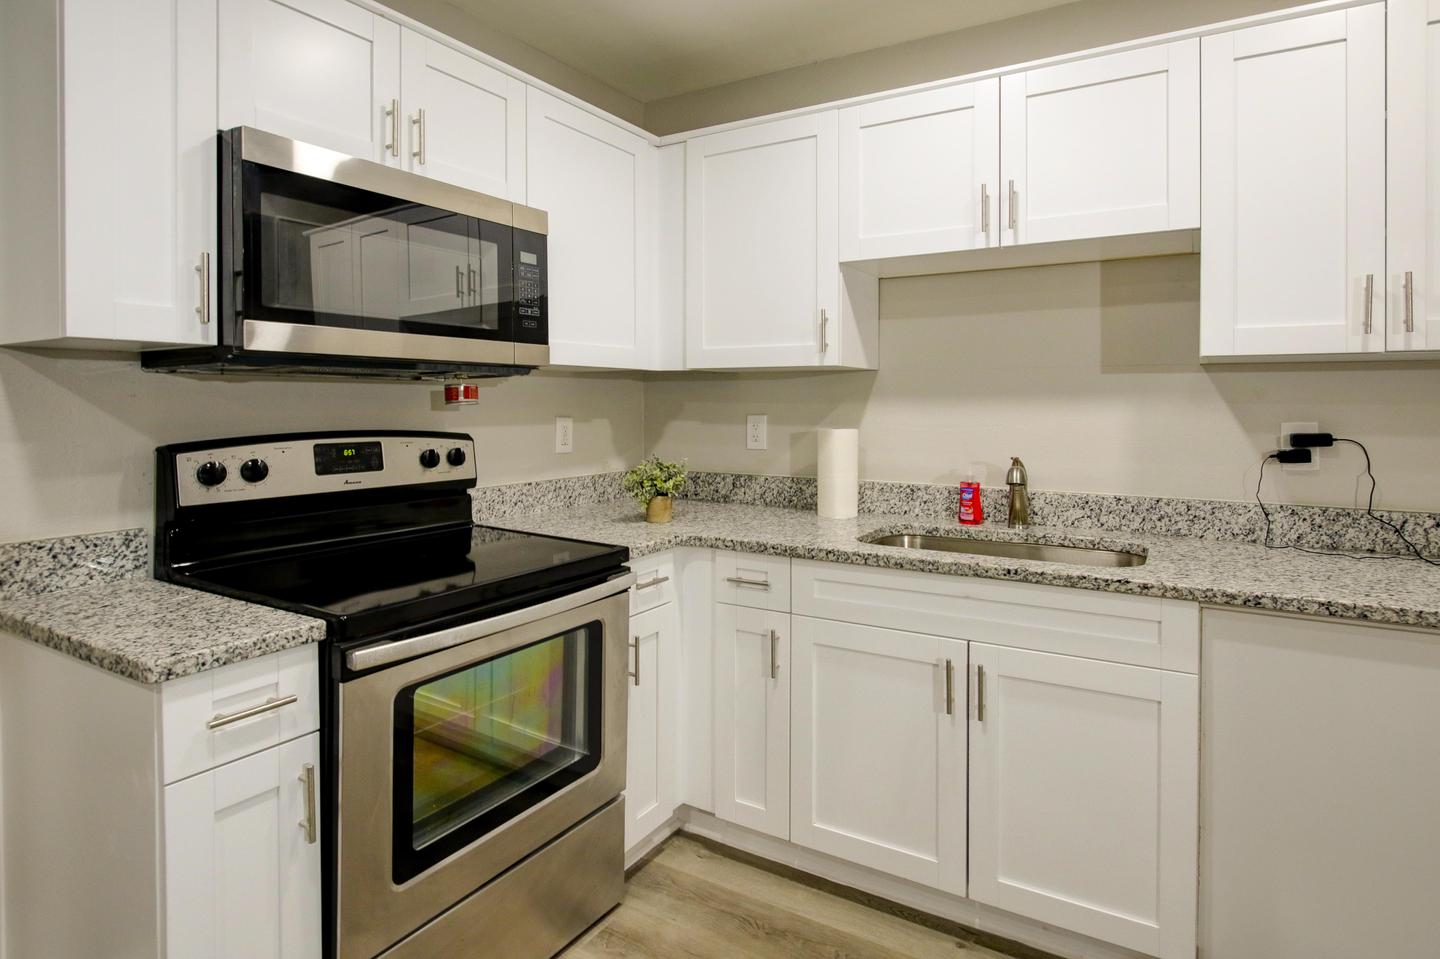 Updated eat-in kitchen with stainless steel refrigerator, oven, microwave and plenty of cabinet space for kitchen storage.